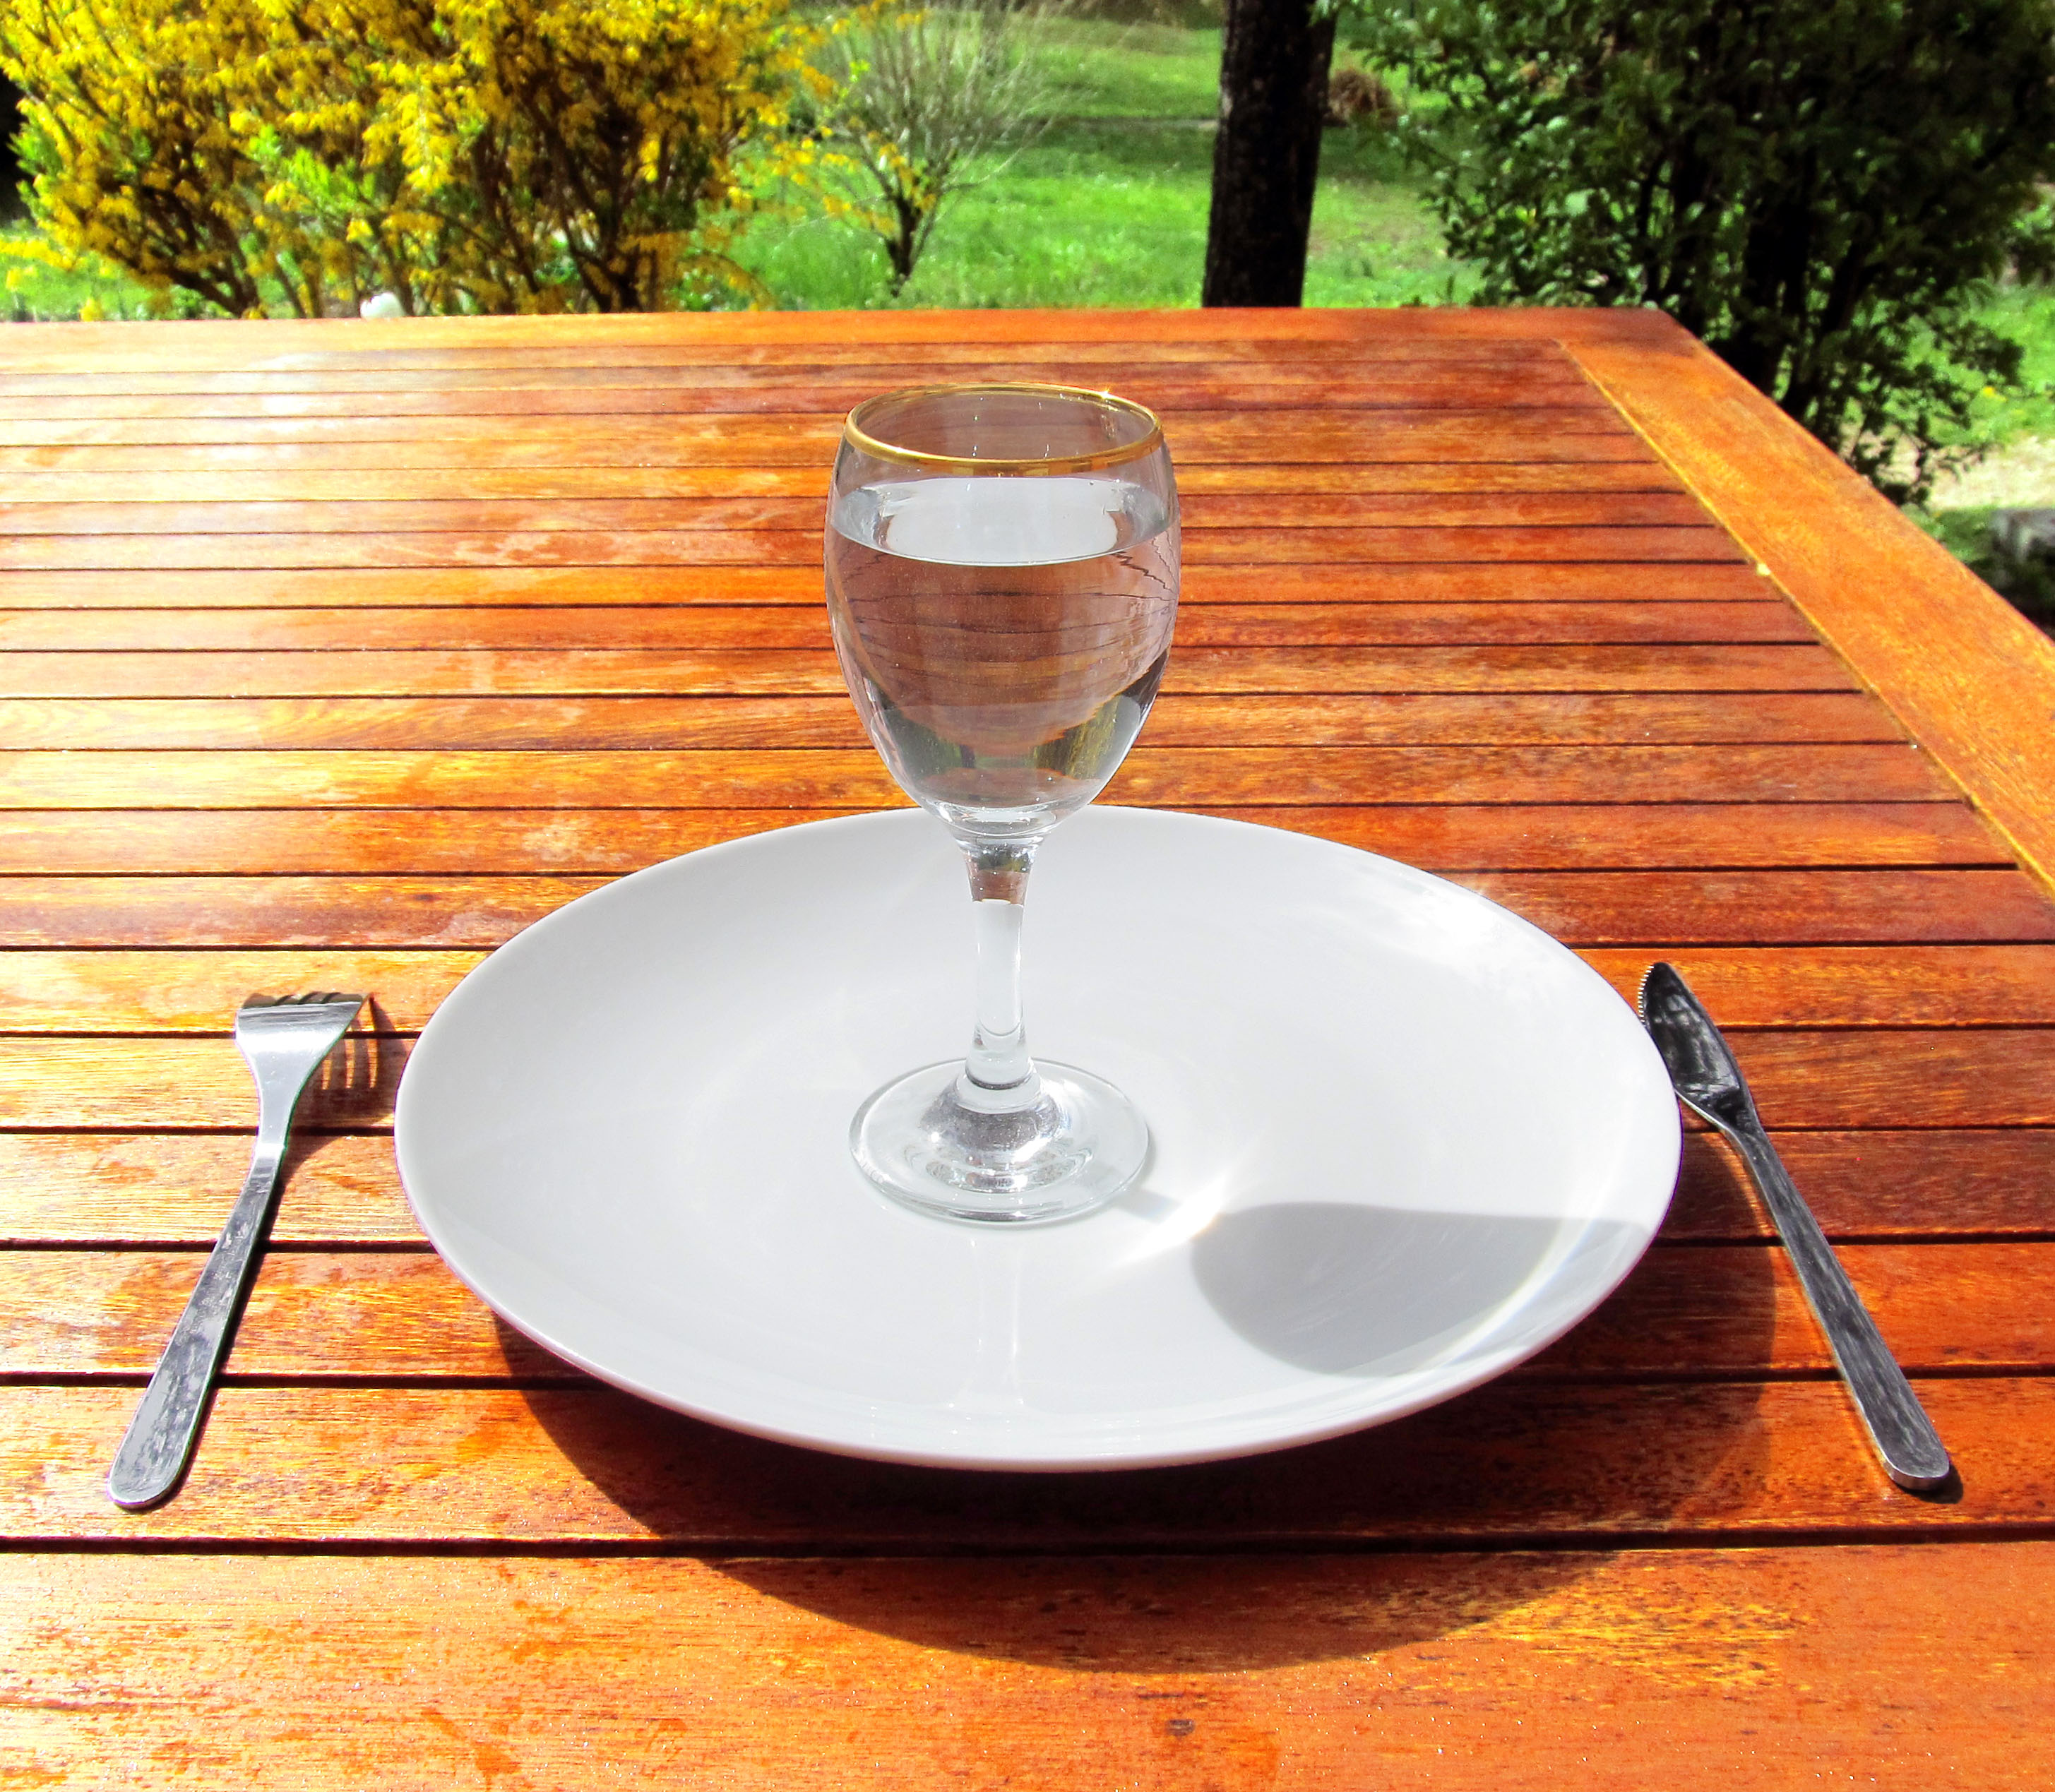 10 Science-backed benefits of intermittent fasting (plus tips to get started)